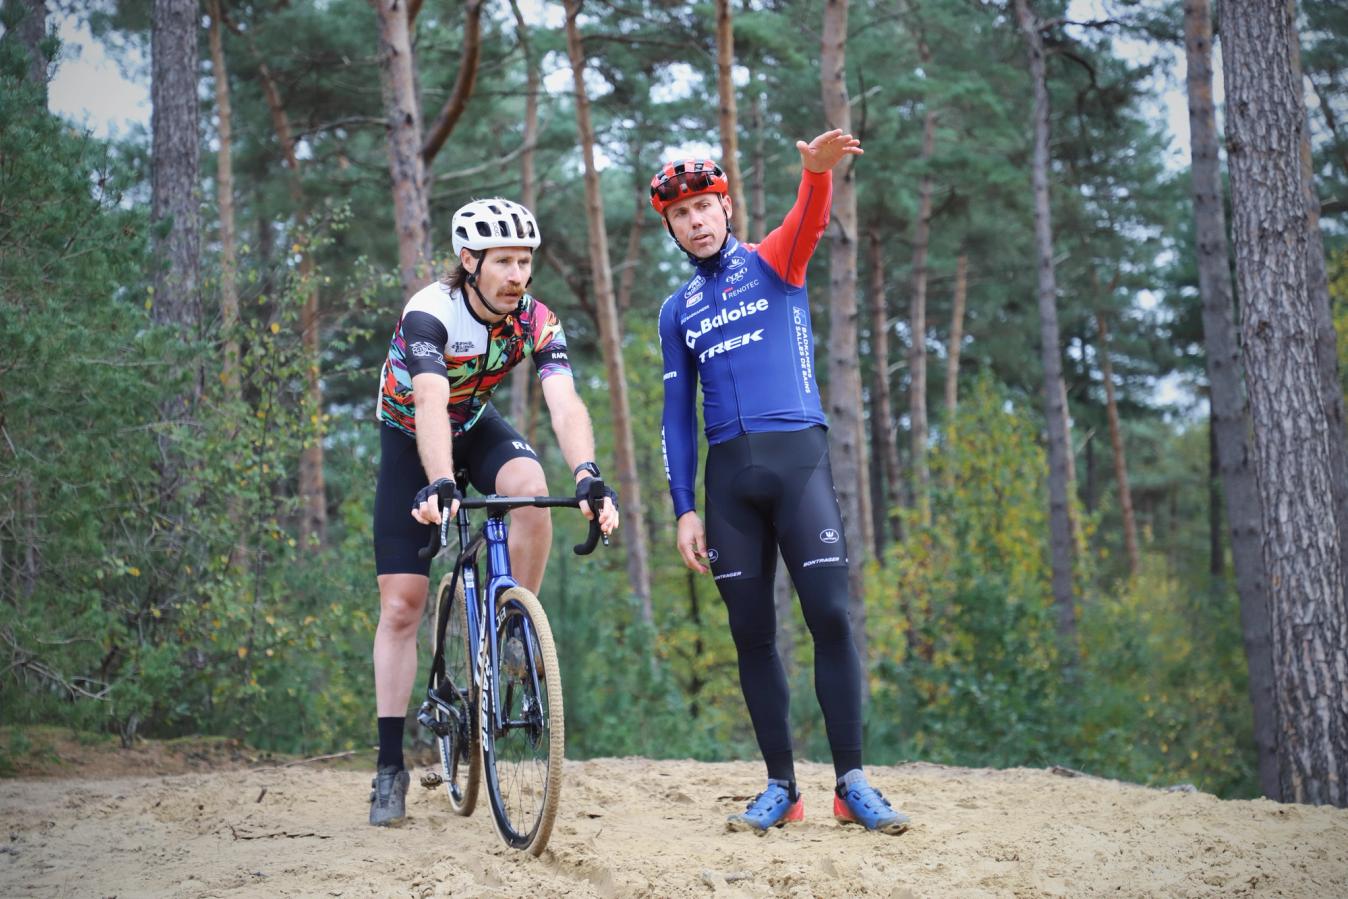 Encouragement and advice from the legendary Sven Nys was invaluable